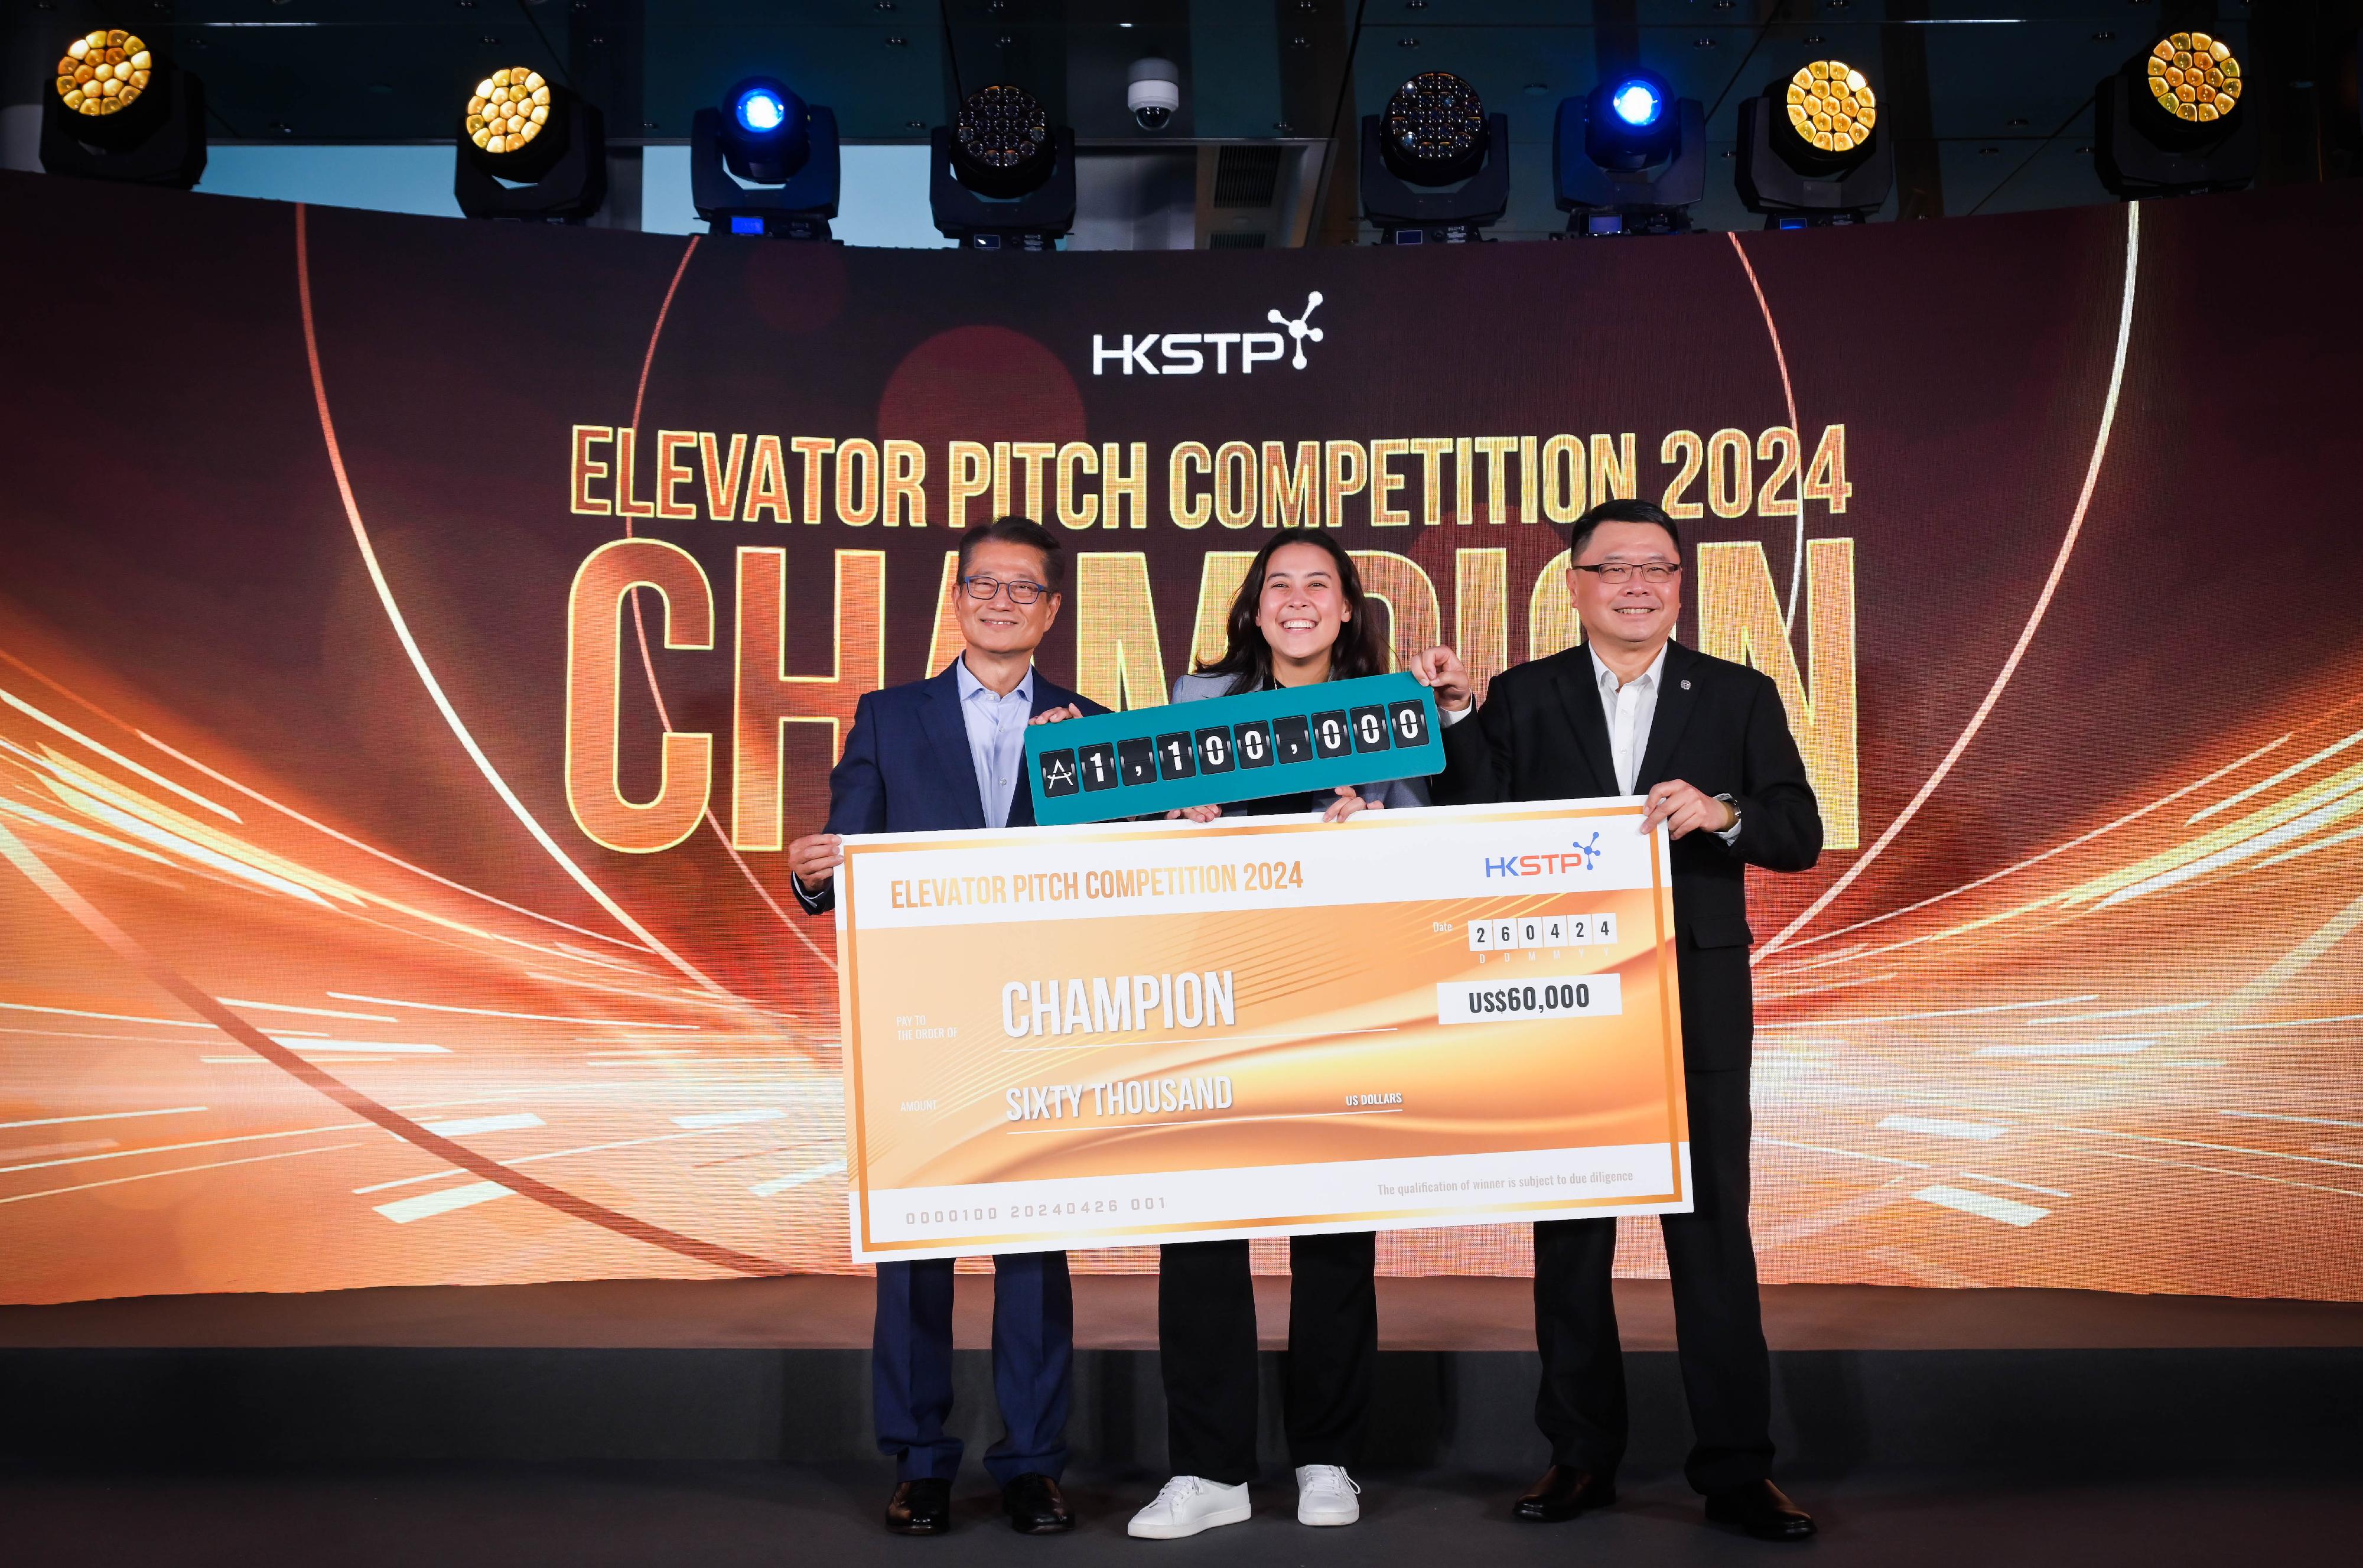 The Financial Secretary, Mr Paul Chan, attended the Elevator Pitch Competition 2024 today (April 26). Photo shows Mr Chan (left), the Chairman of the Hong Kong Science and Technology Parks Corporation, Dr Sunny Chai (right), and the winner of the competition.